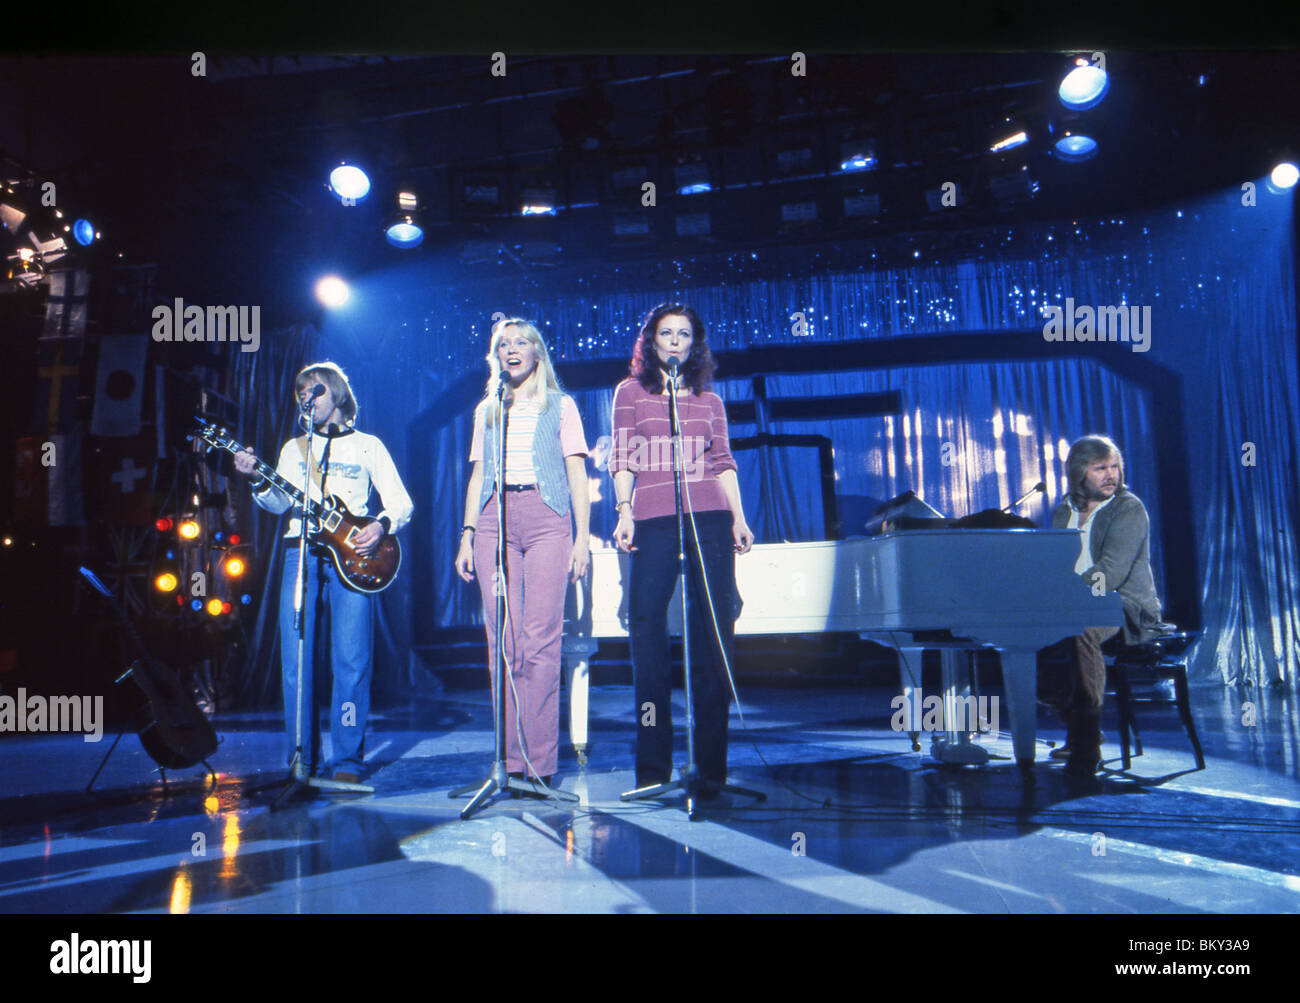 ABBA  - Swedish pop group in rehersal for a TV show Stock Photo